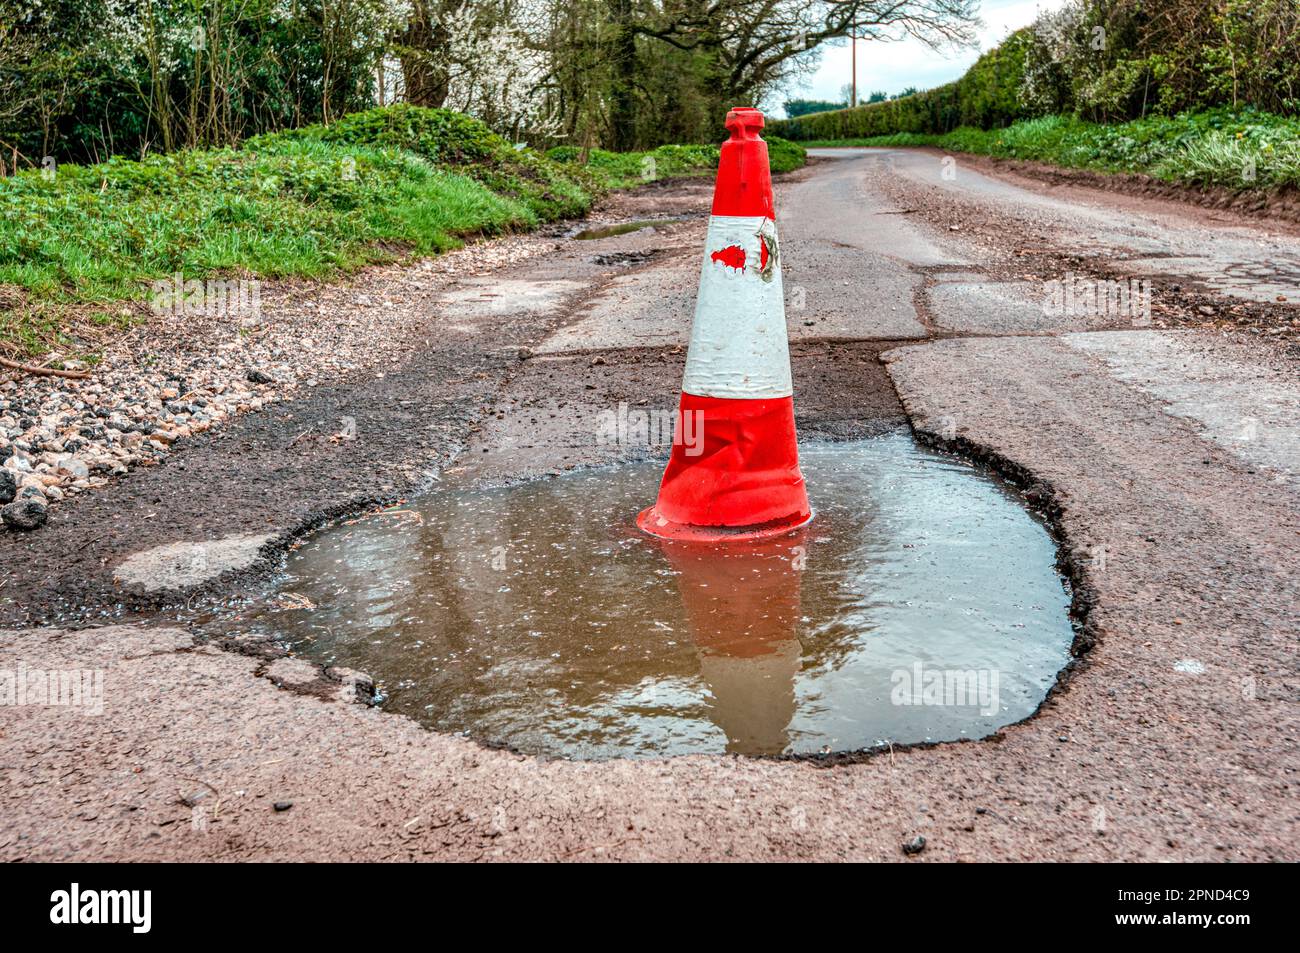 Giant pothole with a traffic cone sitting inside, Battle Corner, Upper Wield, Alresford, Hampshire UK Stock Photo